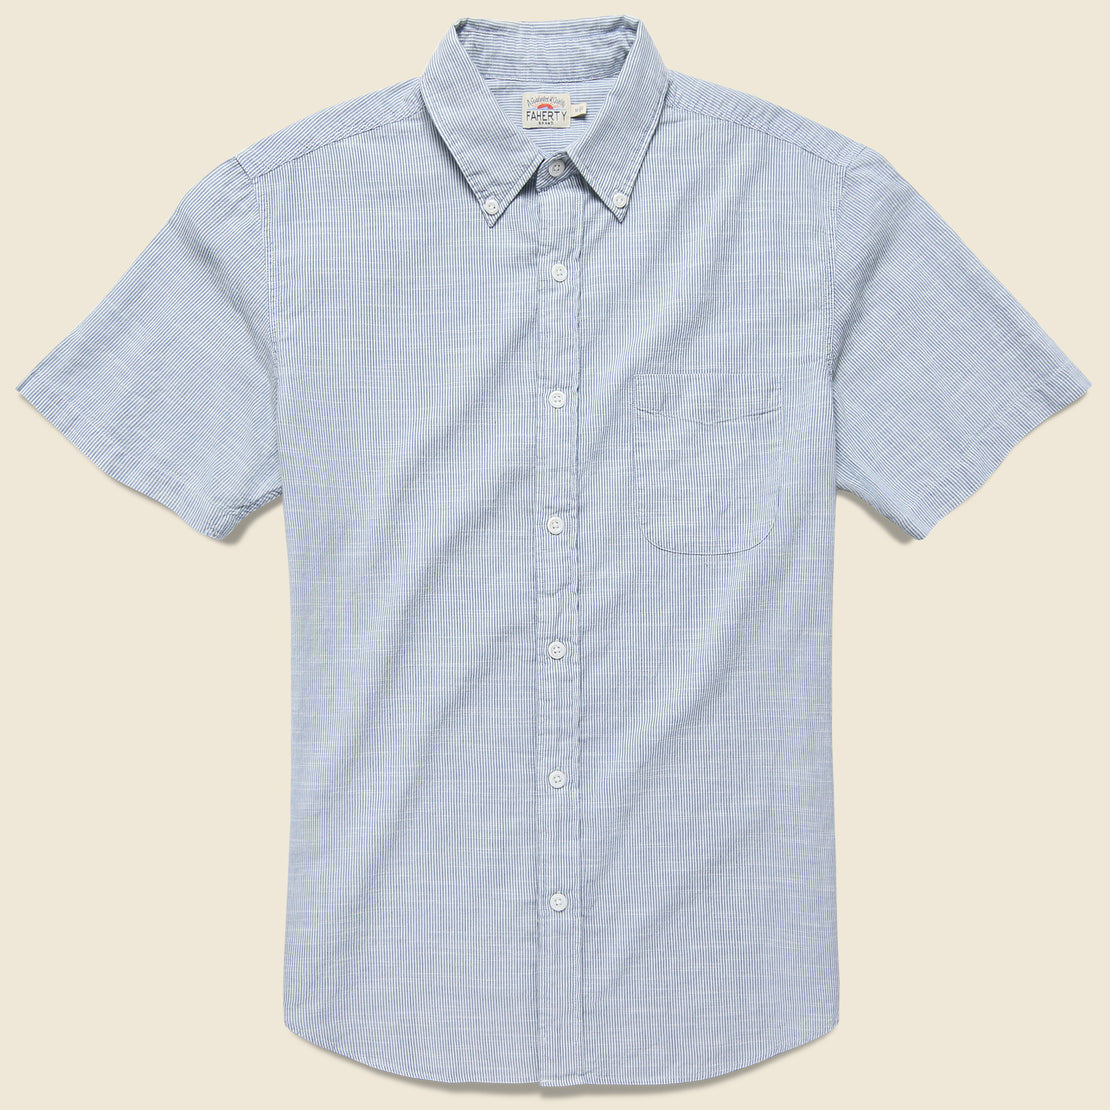 Faherty Pacific Shirt - Summer White Stripe